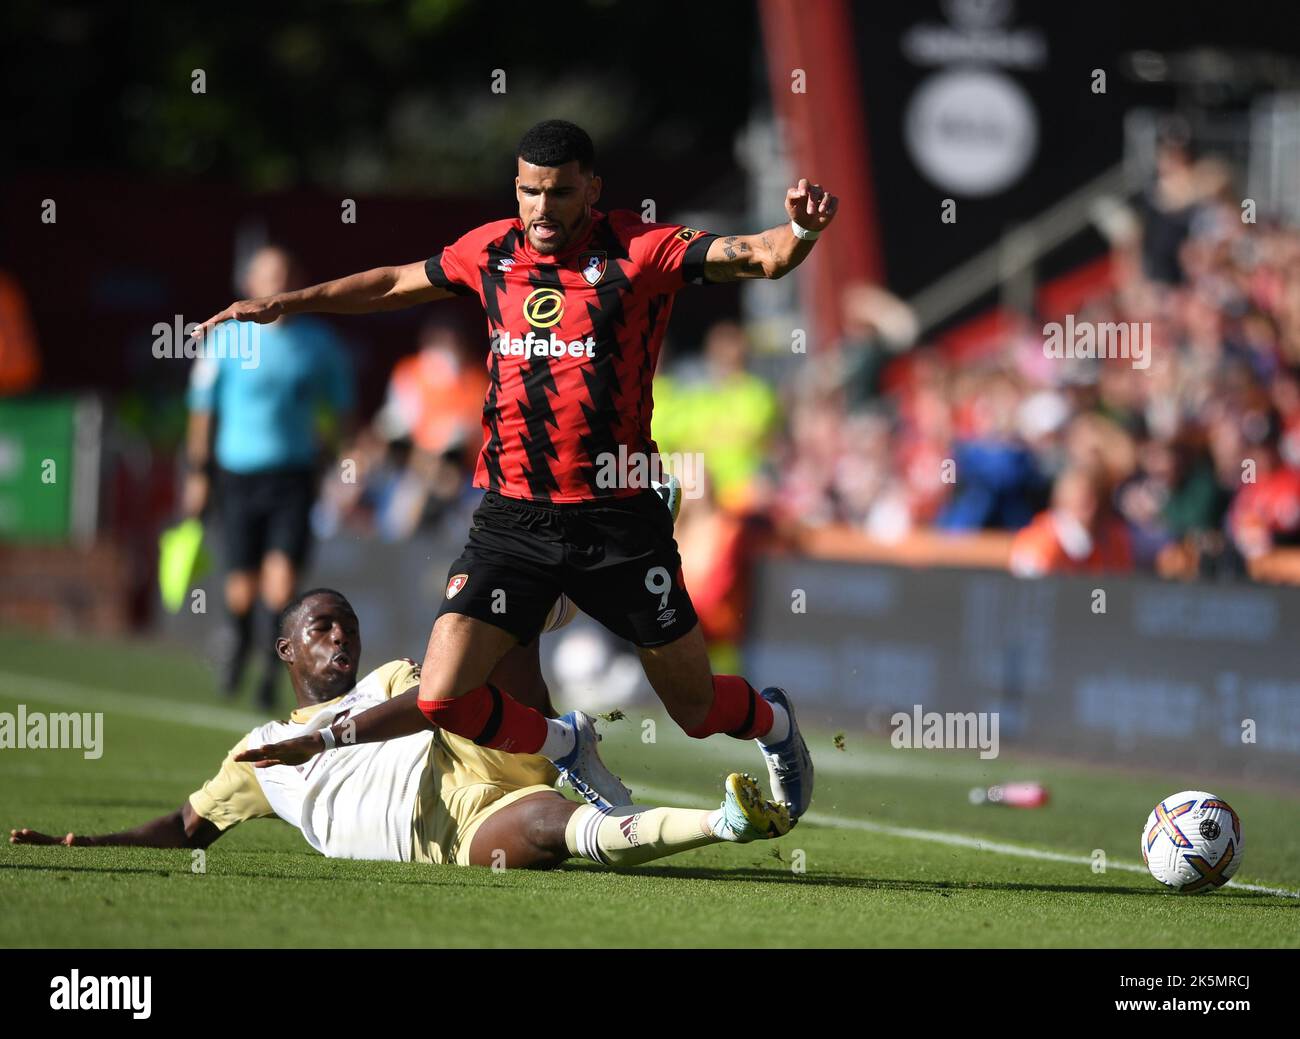 8th August 2022; Vitality Stadium, Boscombe, Dorset, England: Premiership football, AFC Bournemouth versus Leicester City : Boubakary Soumare of Leicester City fouls Dominic Solanke of Bournemouth Stock Photo